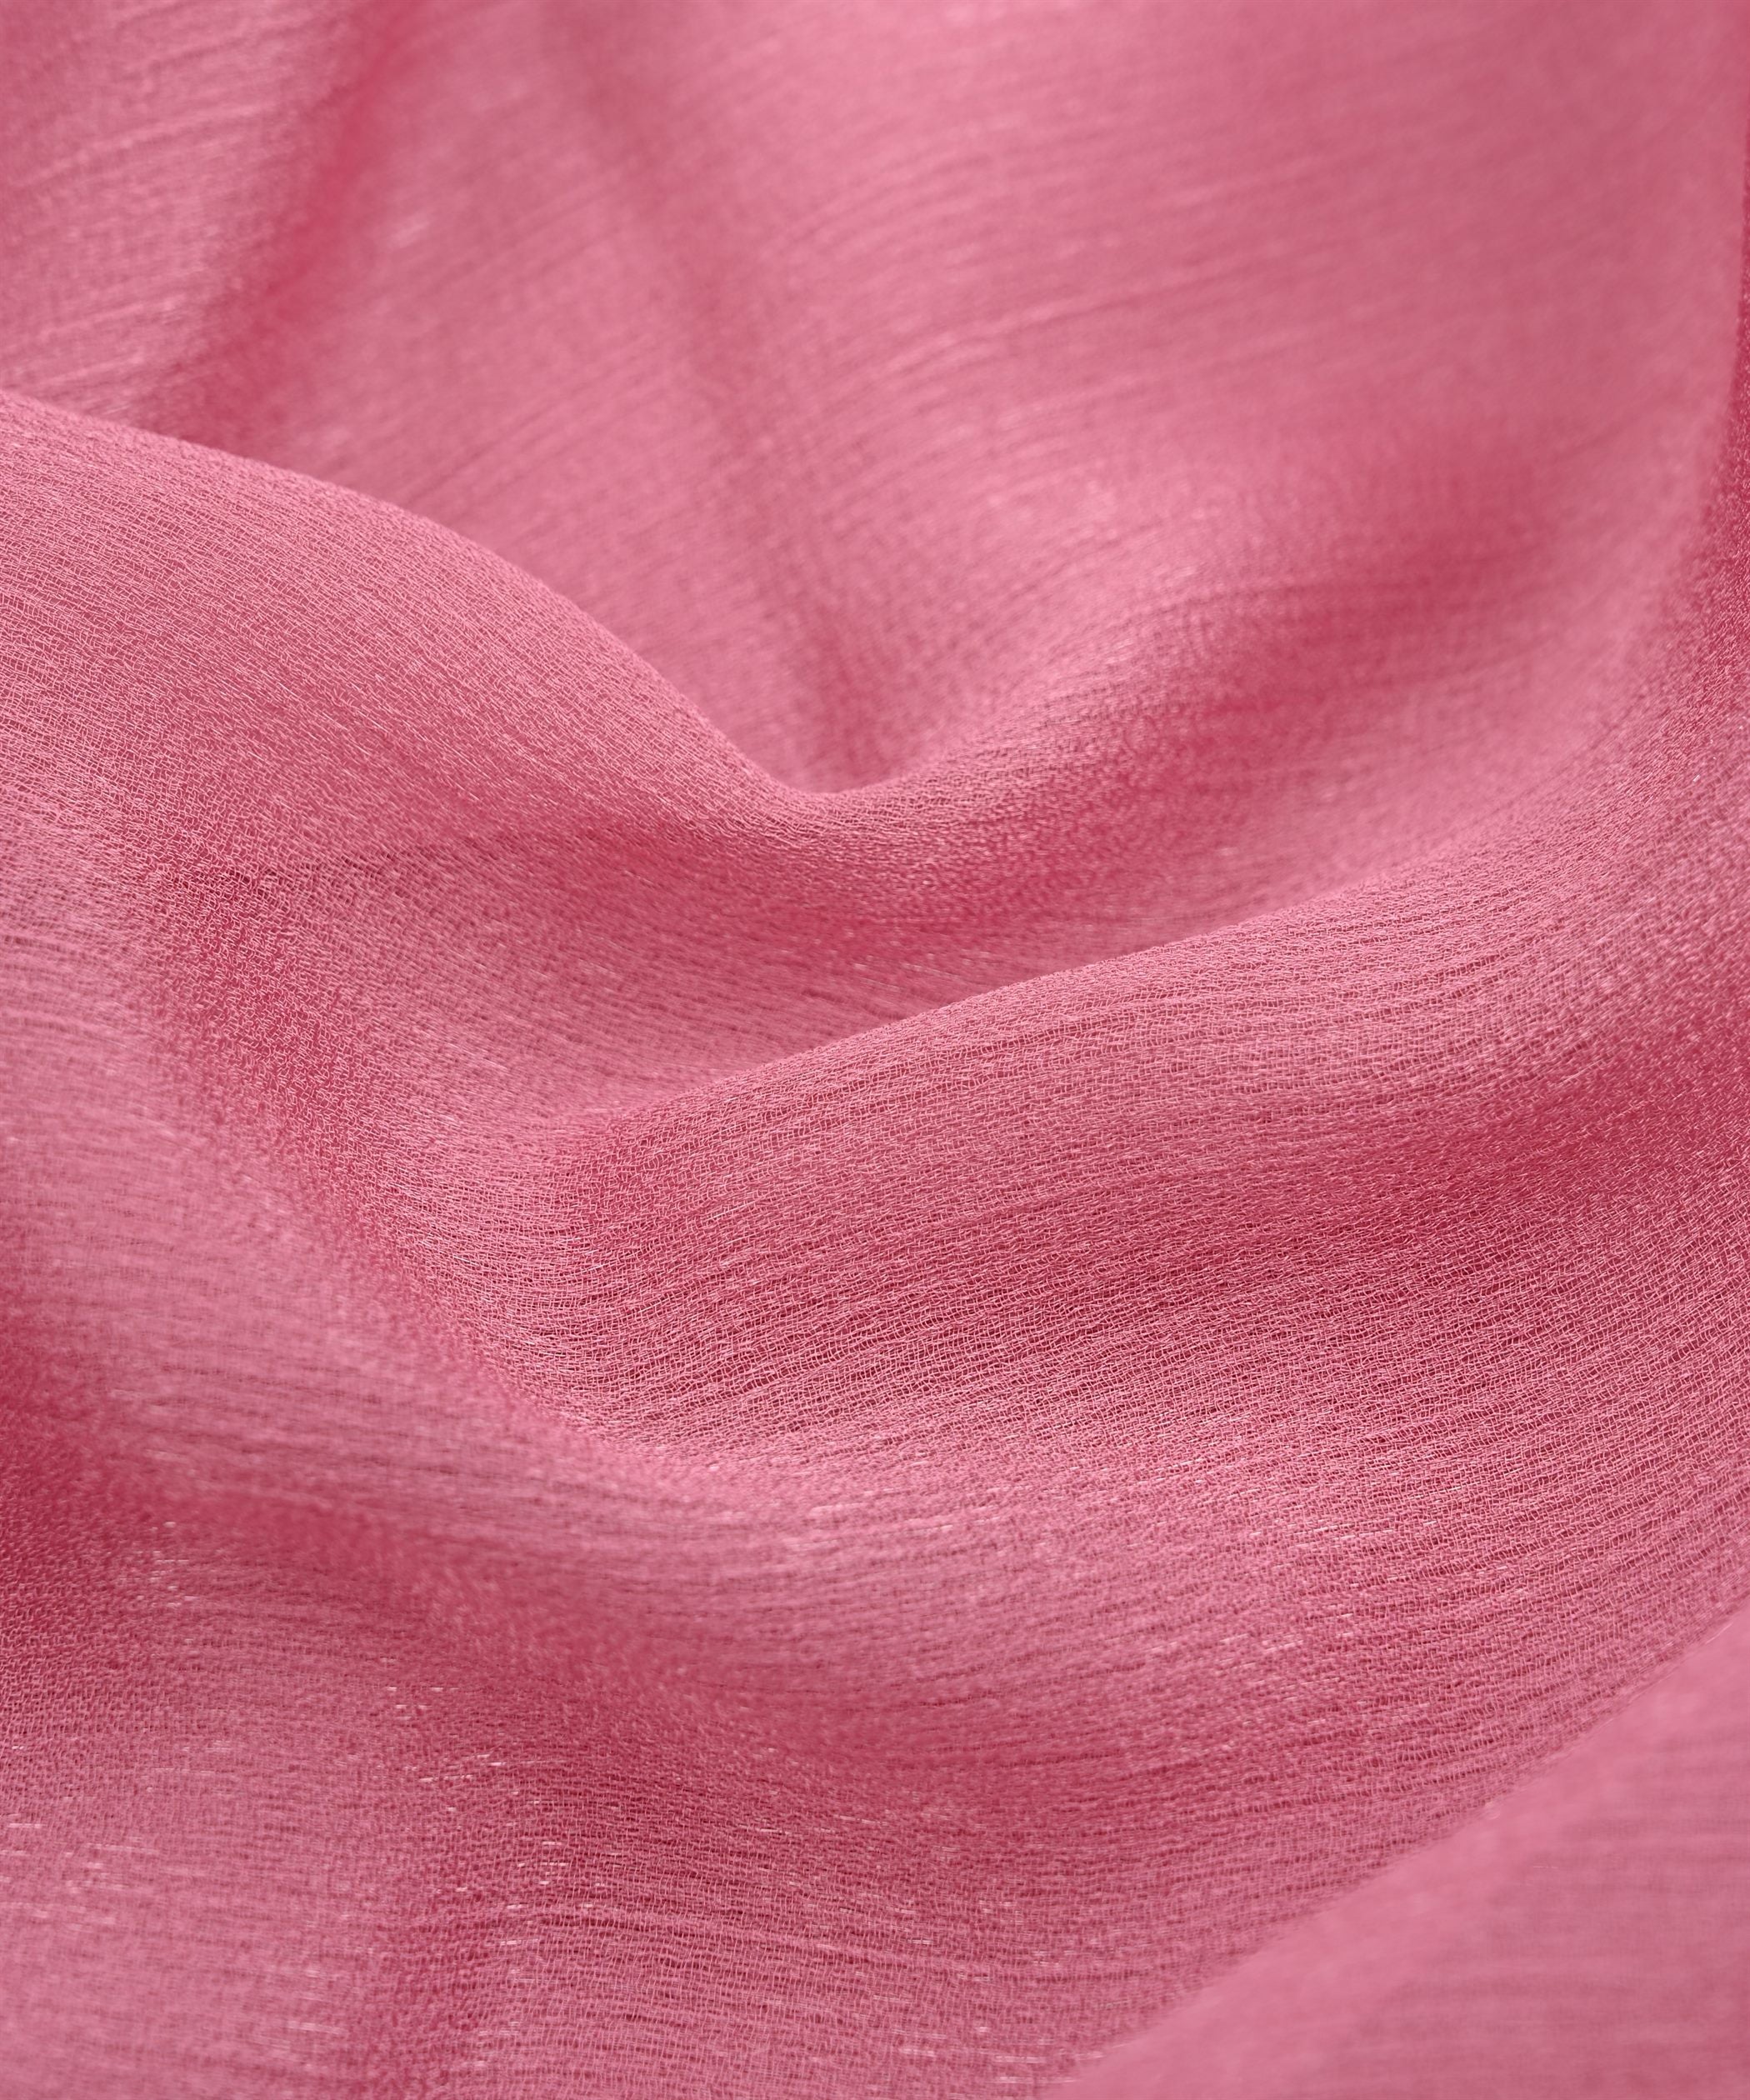 Plain Pink Chiffon Fabric, For Garments at Rs 37/meter in Noida